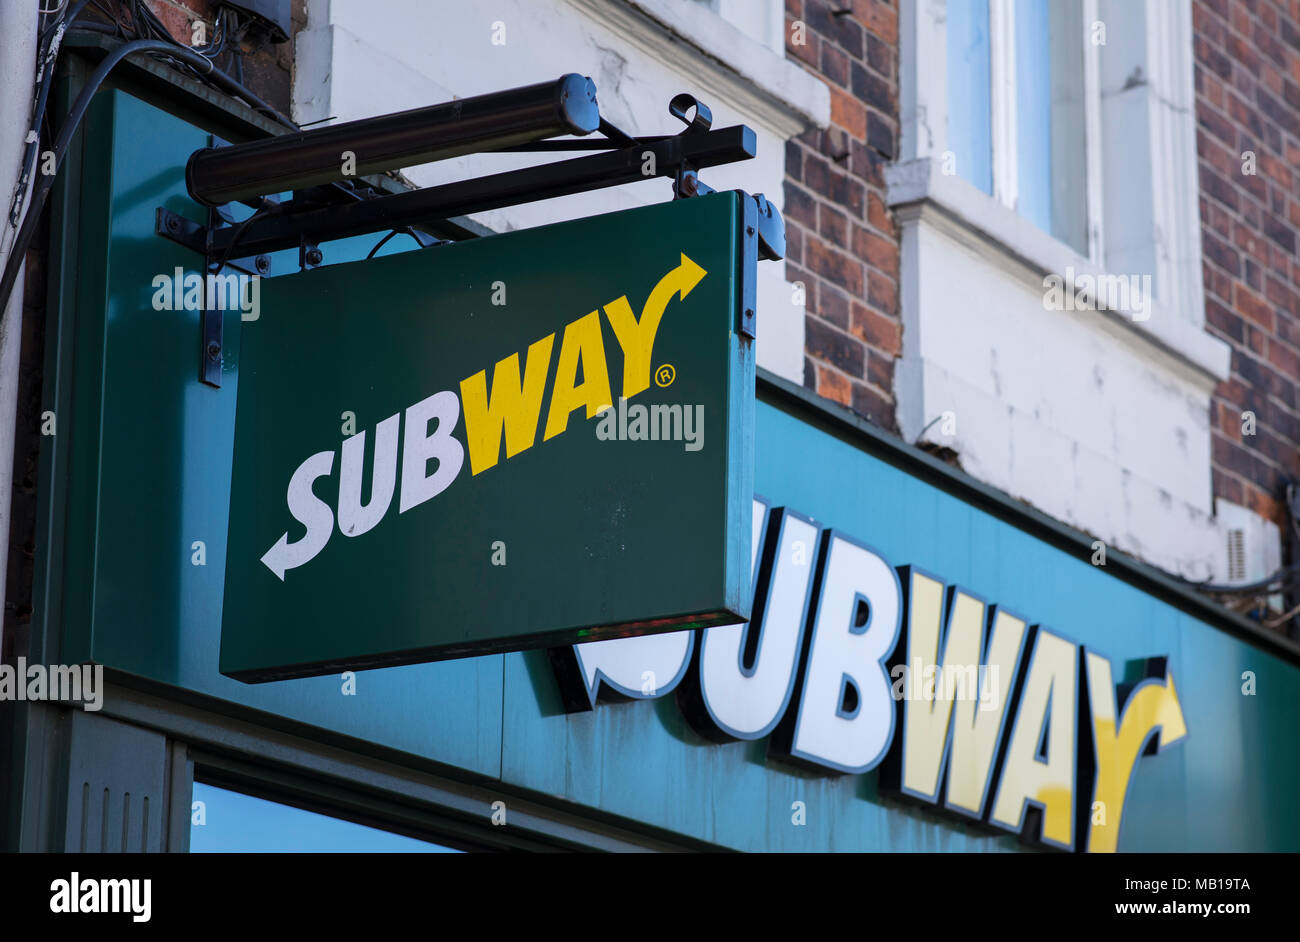 Subway fast food sign, High Street, Lincoln, Lincolnshire, UK - 5th April 2018 Stock Photo